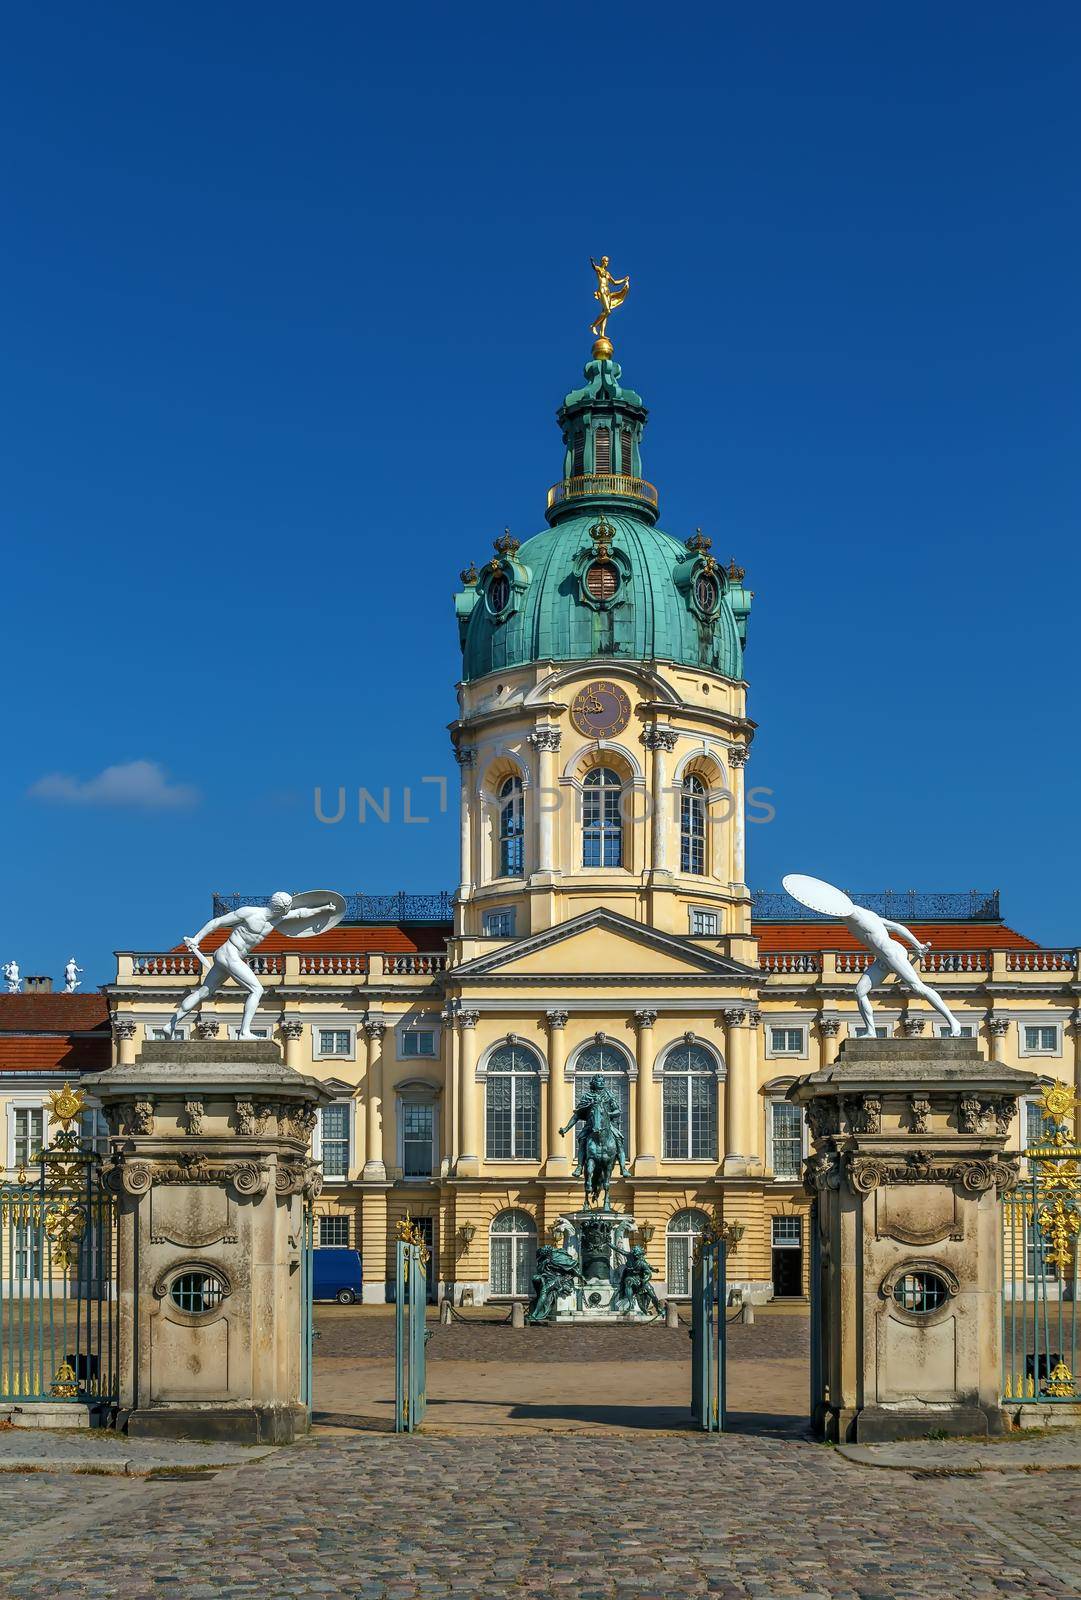 Charlottenburg Palace is the largest palace in Berlin and the only surviving royal residence in the city, Germany